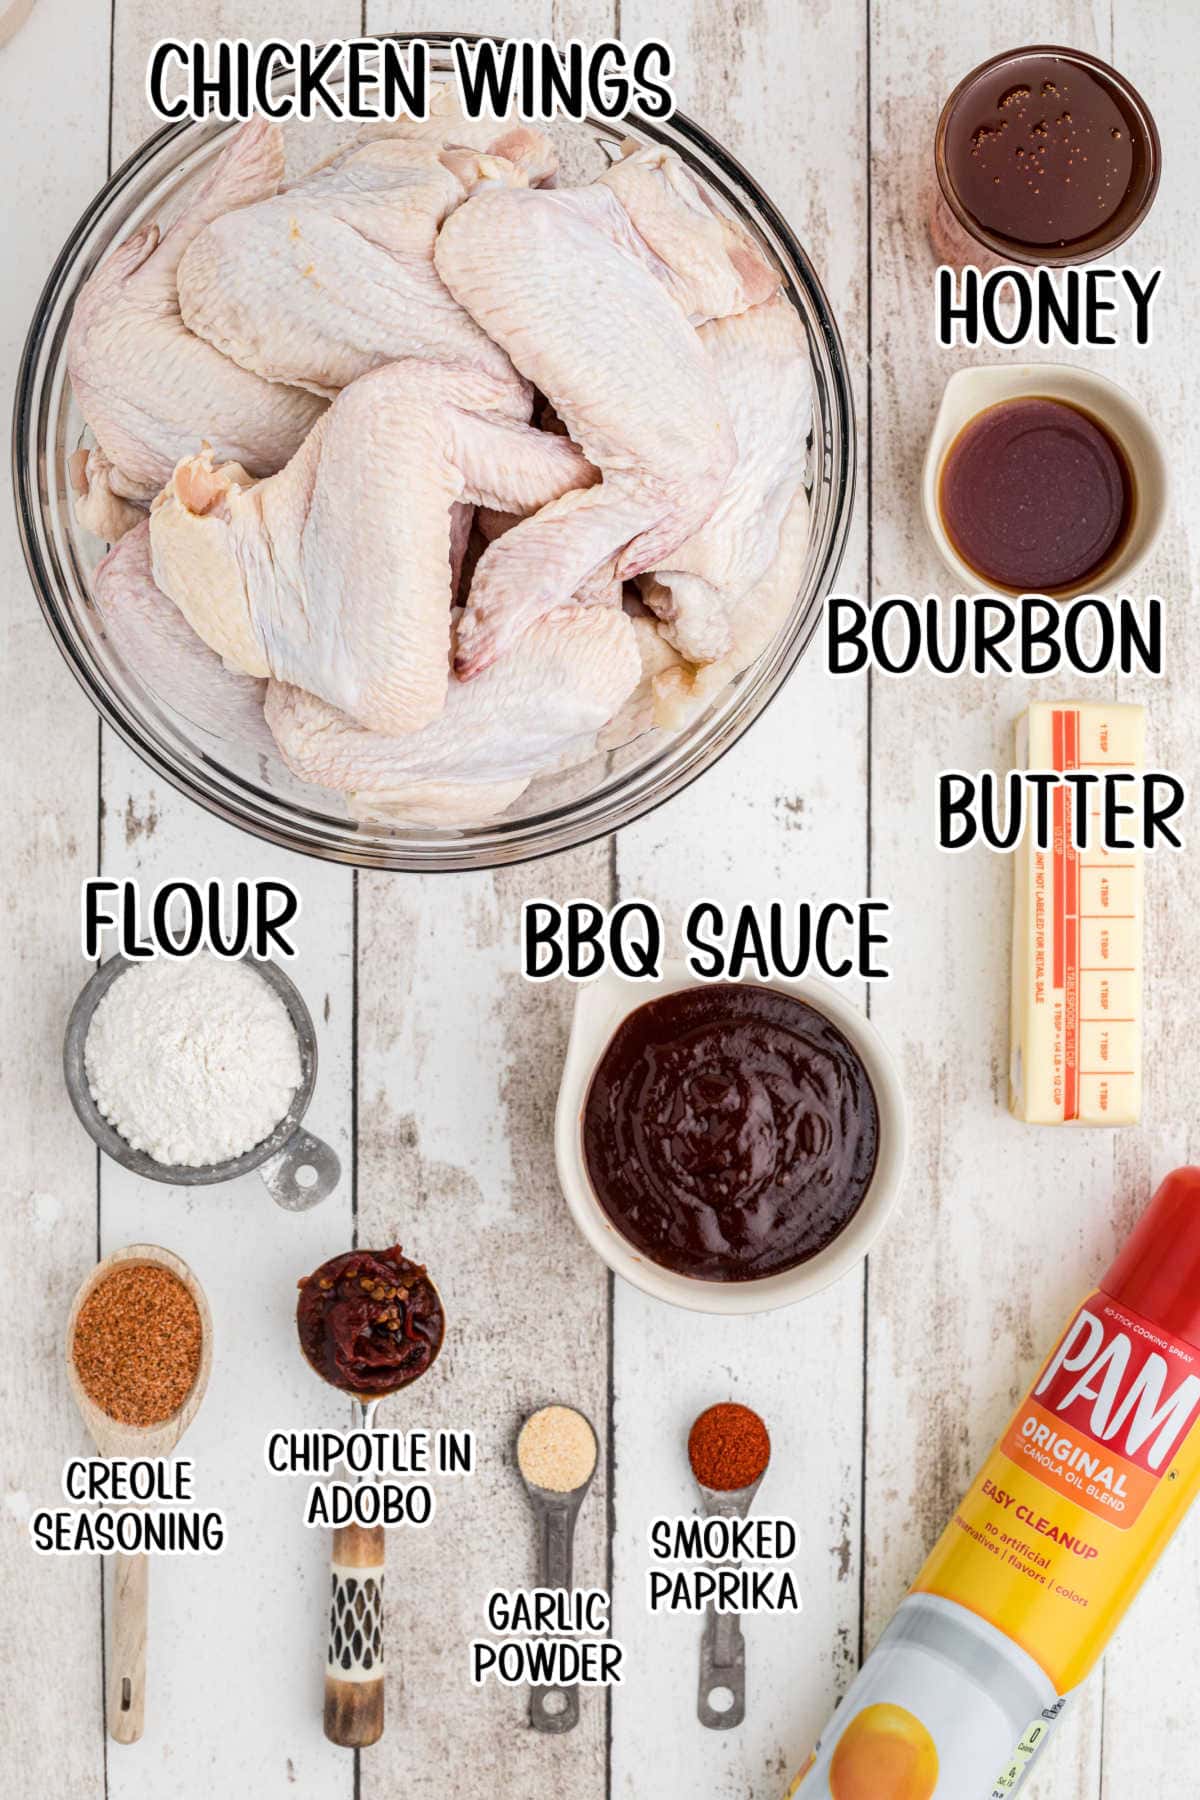 Ingredients for oven baked chicken wings.